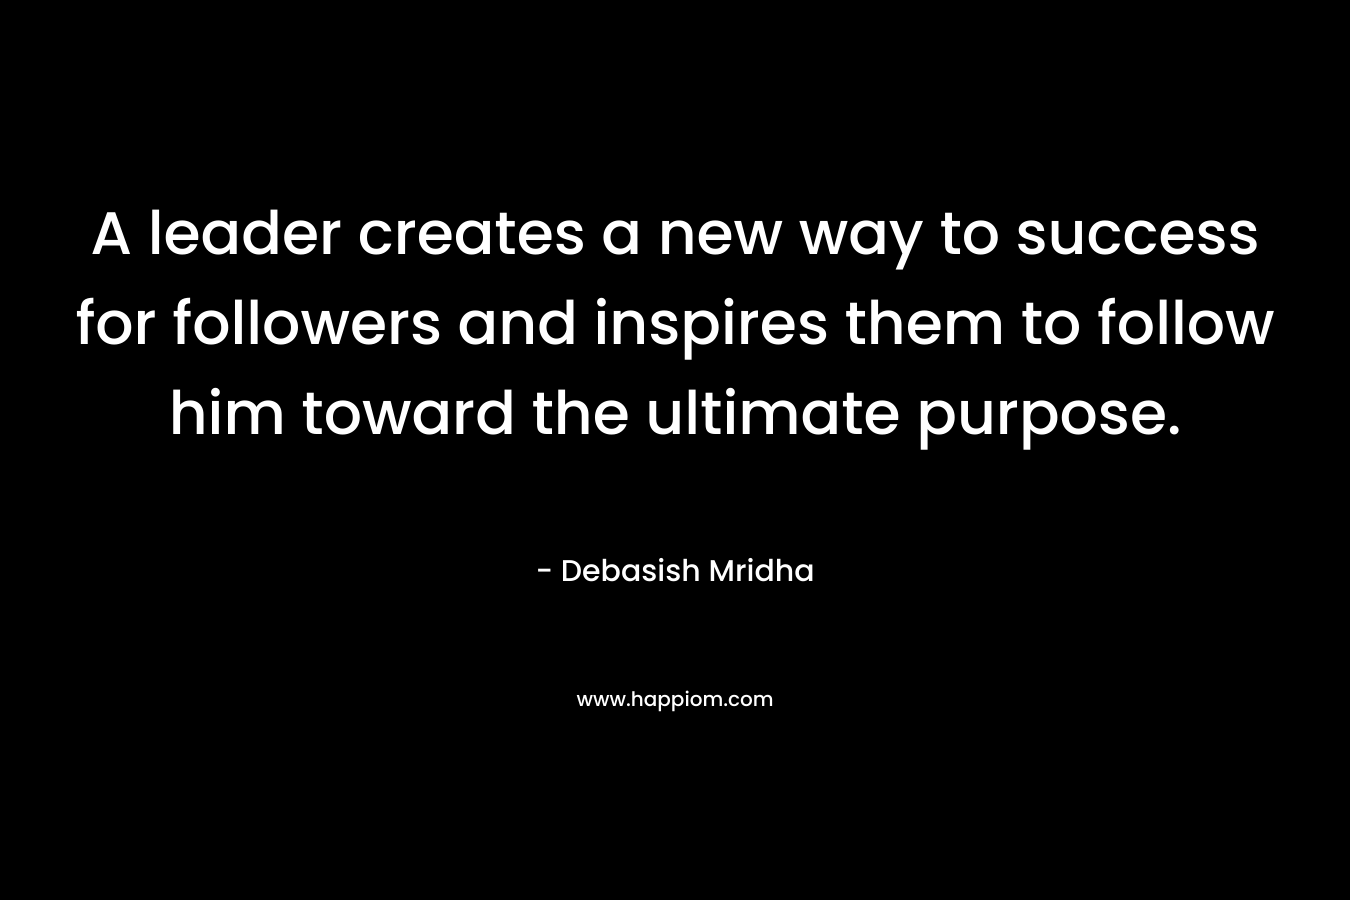 A leader creates a new way to success for followers and inspires them to follow him toward the ultimate purpose. – Debasish Mridha